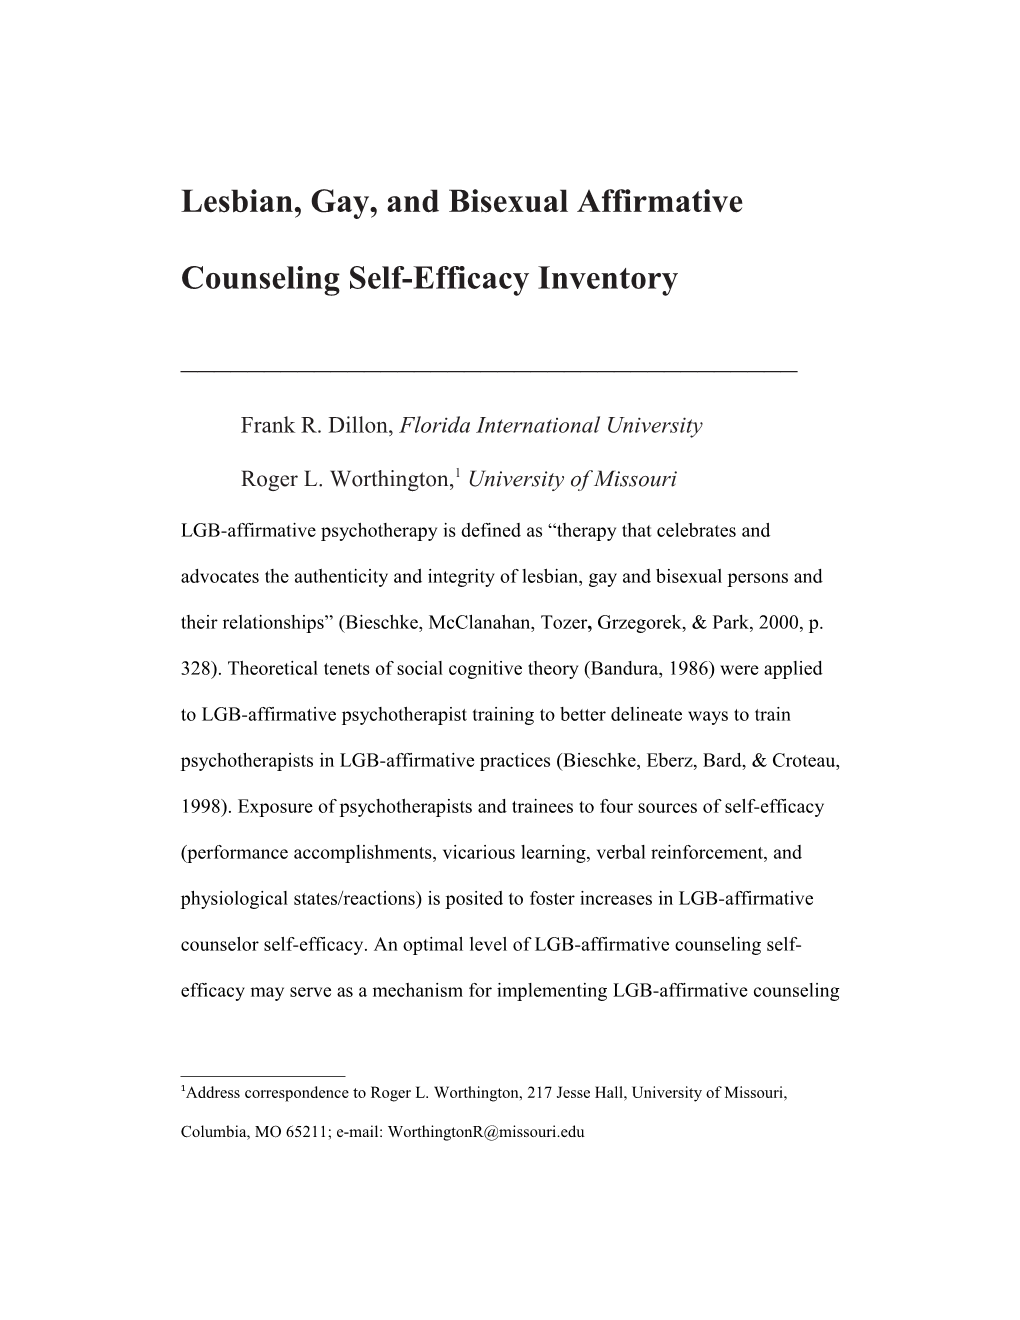 The Lesbian, Gay, and Bisexual Affirmative Counseling Self-Efficacy Inventory (LGB-CSI) ______